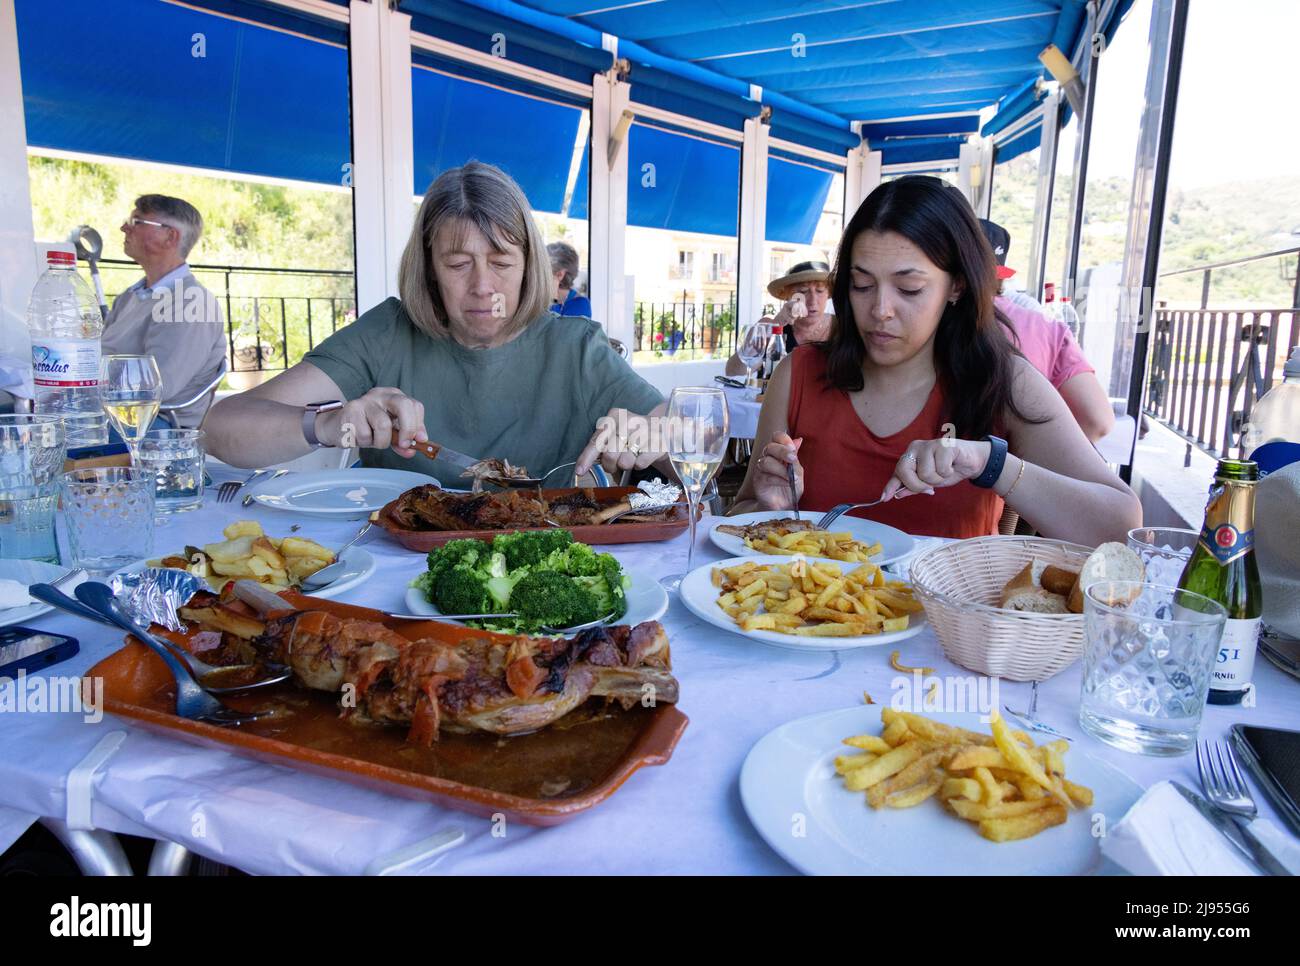 Spanish restaurant; Two women eating meat at a meal in a restaurant in the daytime, Andalusia, Spain Europe Stock Photo